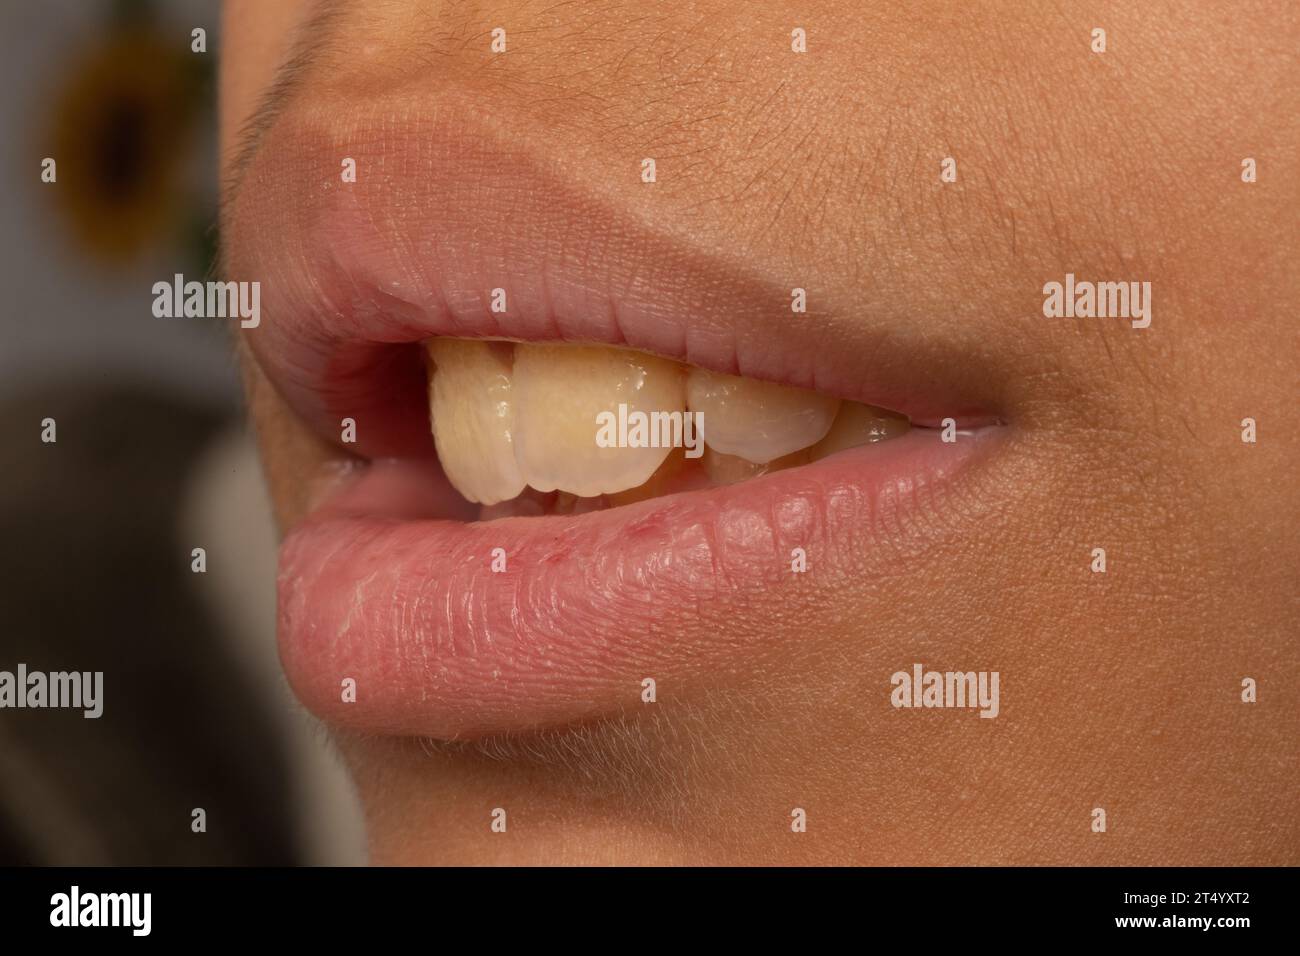 Closeup of a kid's open mouth showing plaque on yellow teeth Stock Photo